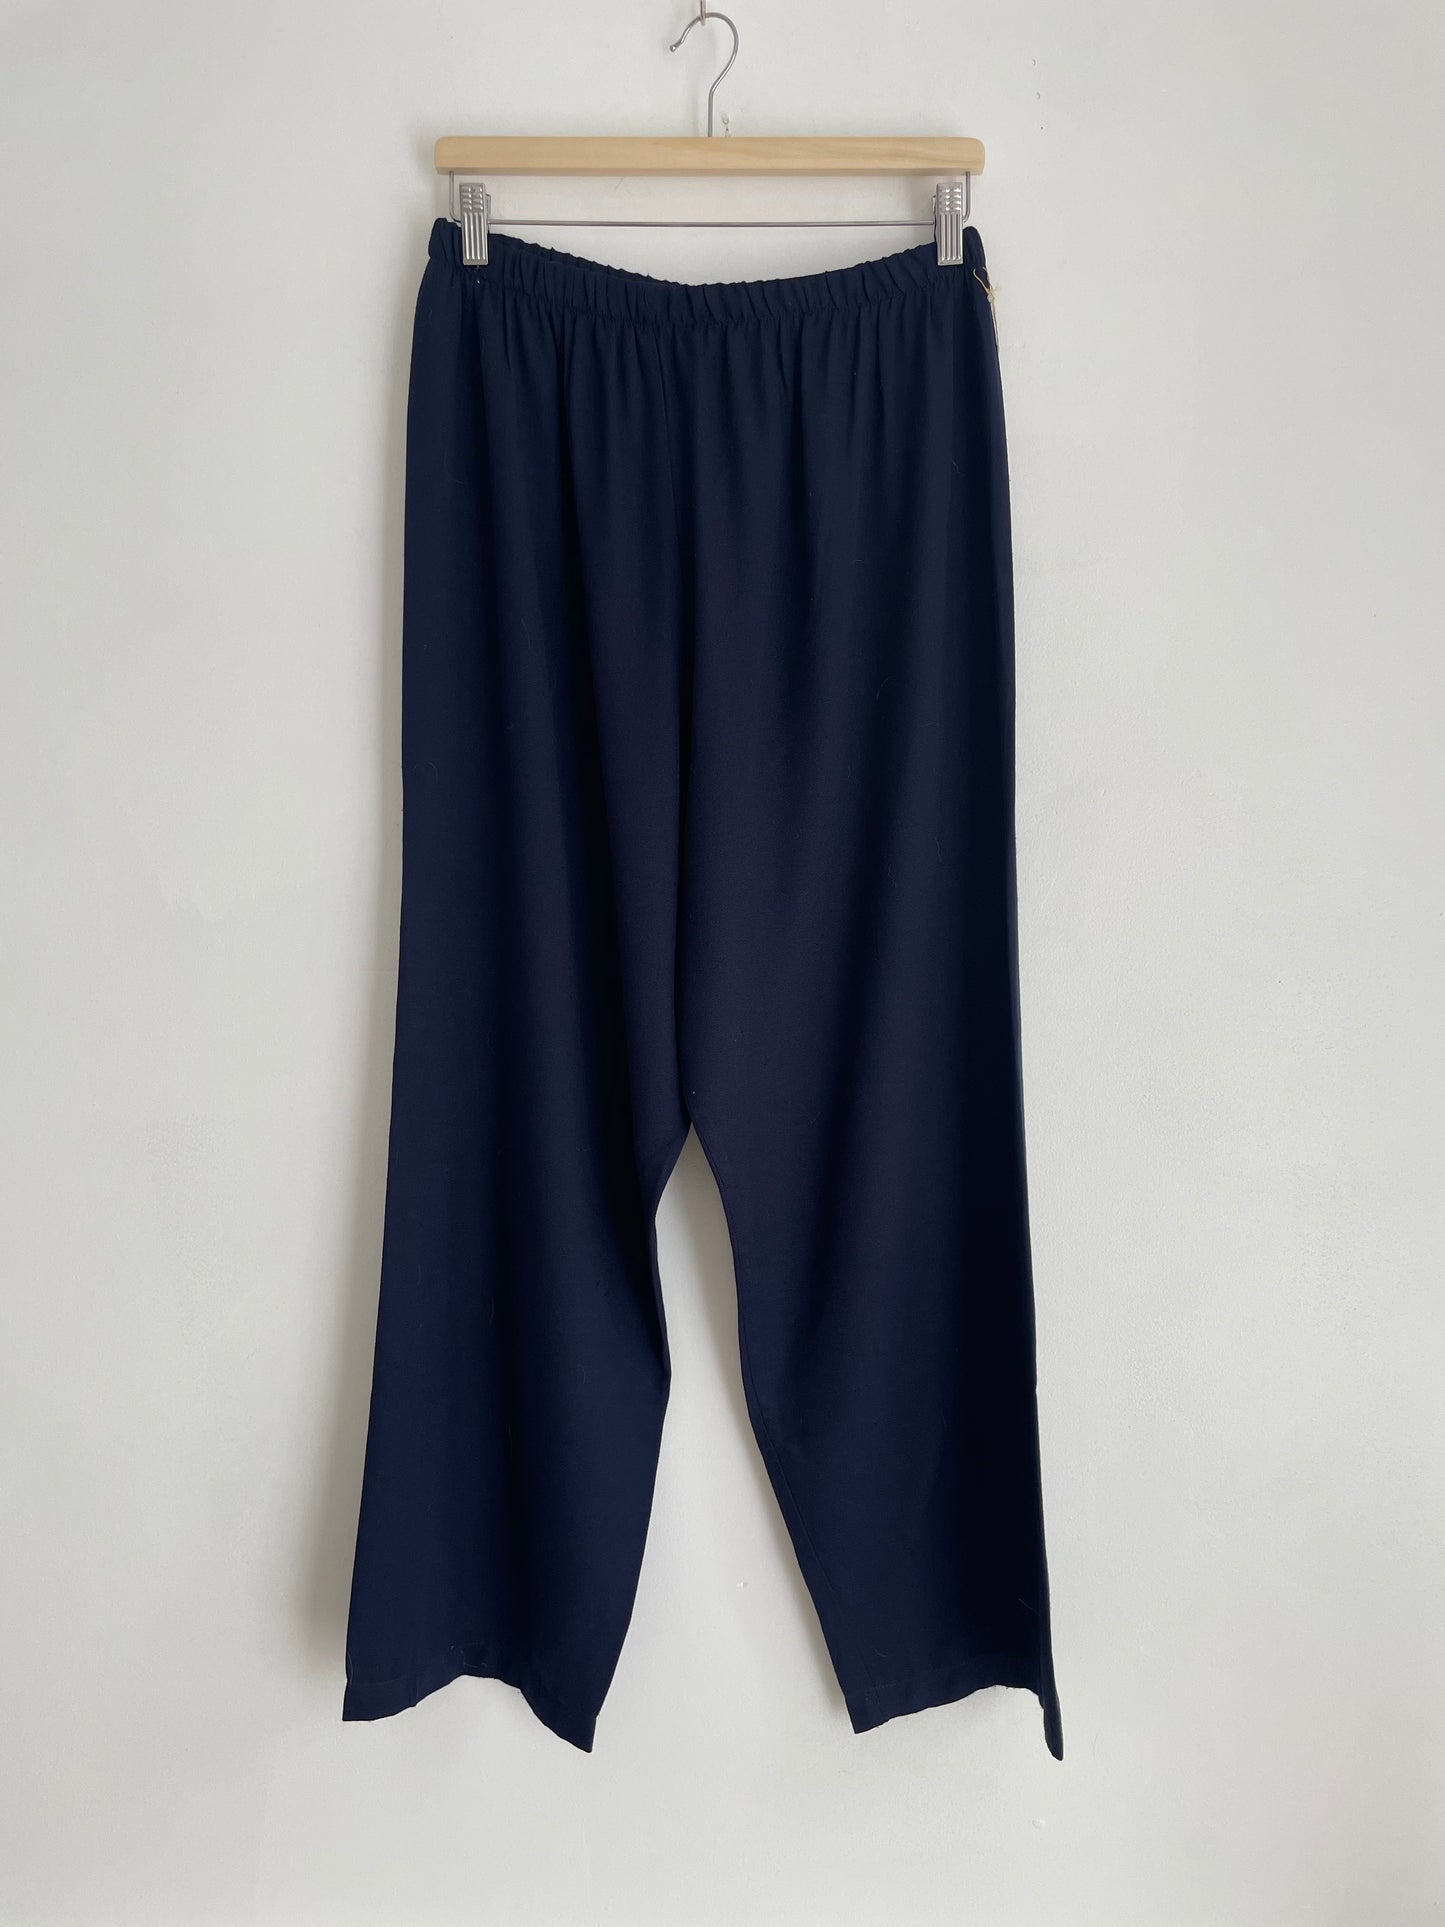 Navy Stretchy Pant | Small